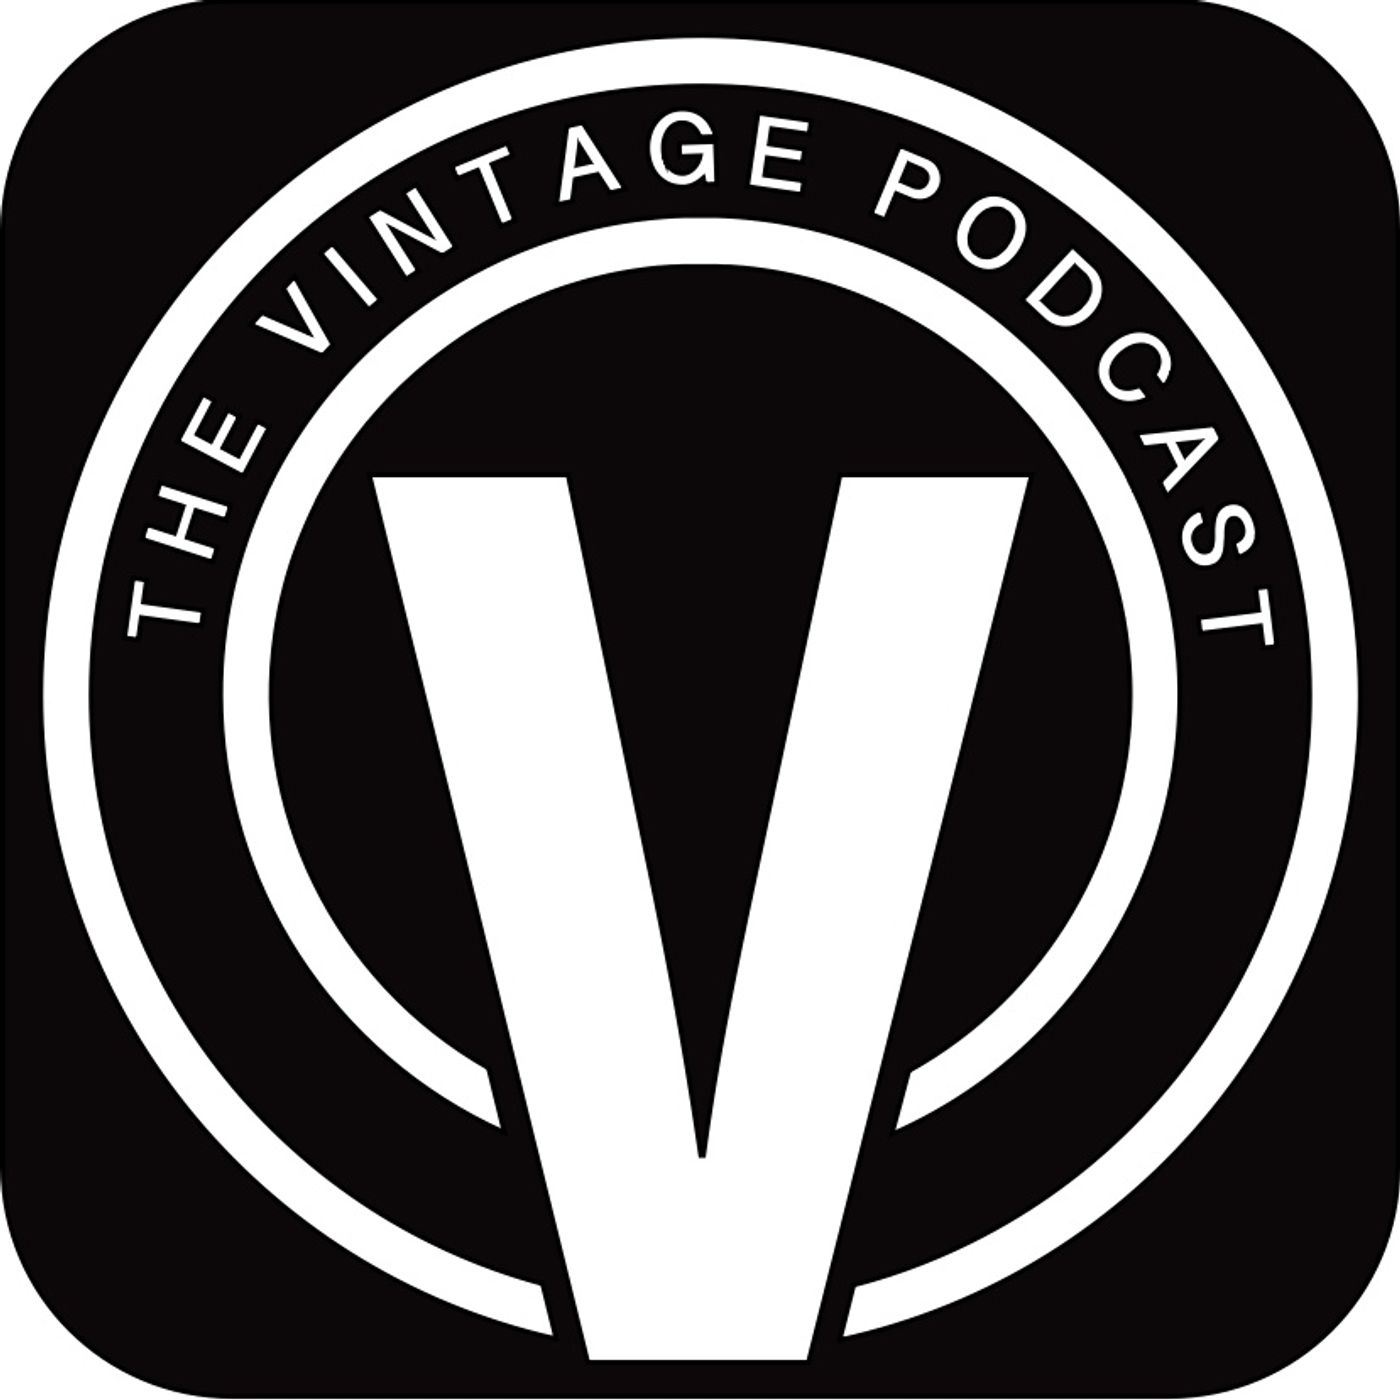 THE VINTAGE PODCAST